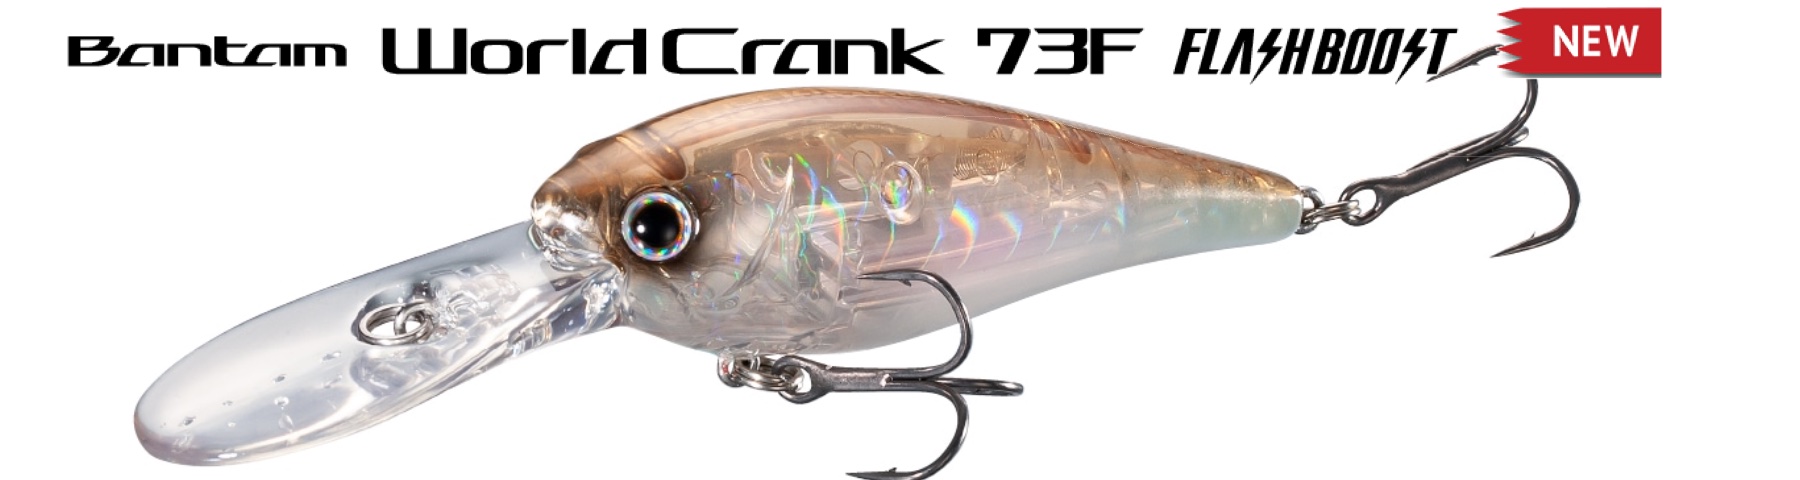 Fishing-Lure-Evolution, your web store that specializes in baits